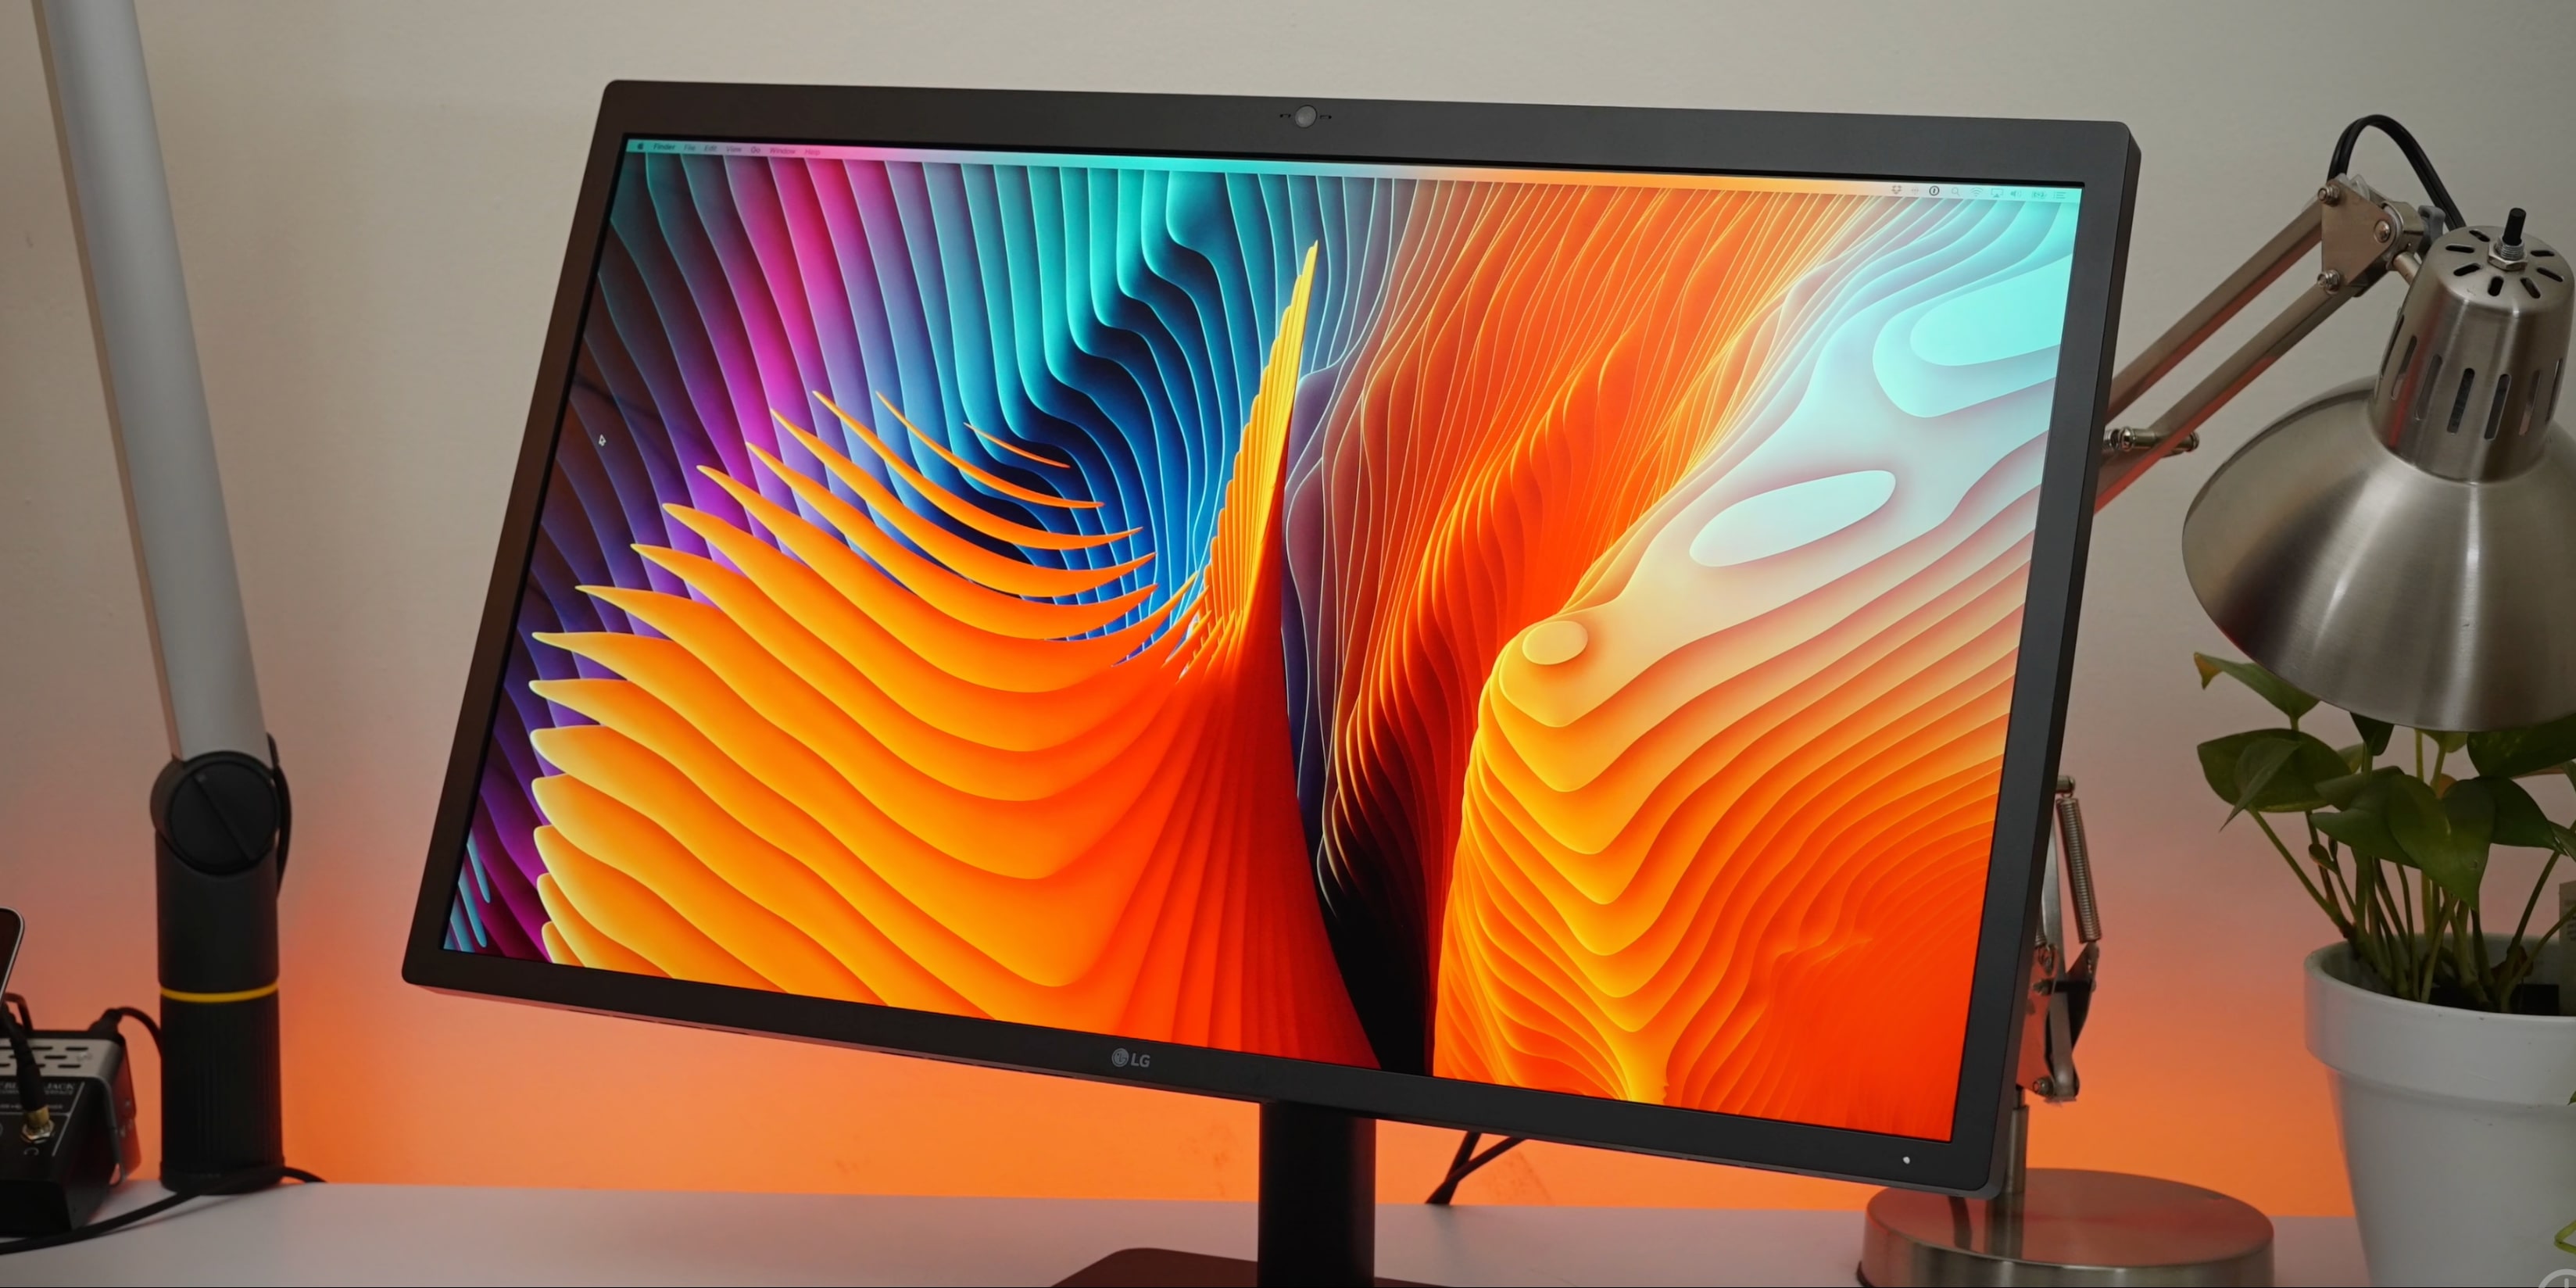 The Apple Studio Display is nice, but this rival LG 5K monitor is looking  UltraFine at nearly half the price for Black Friday